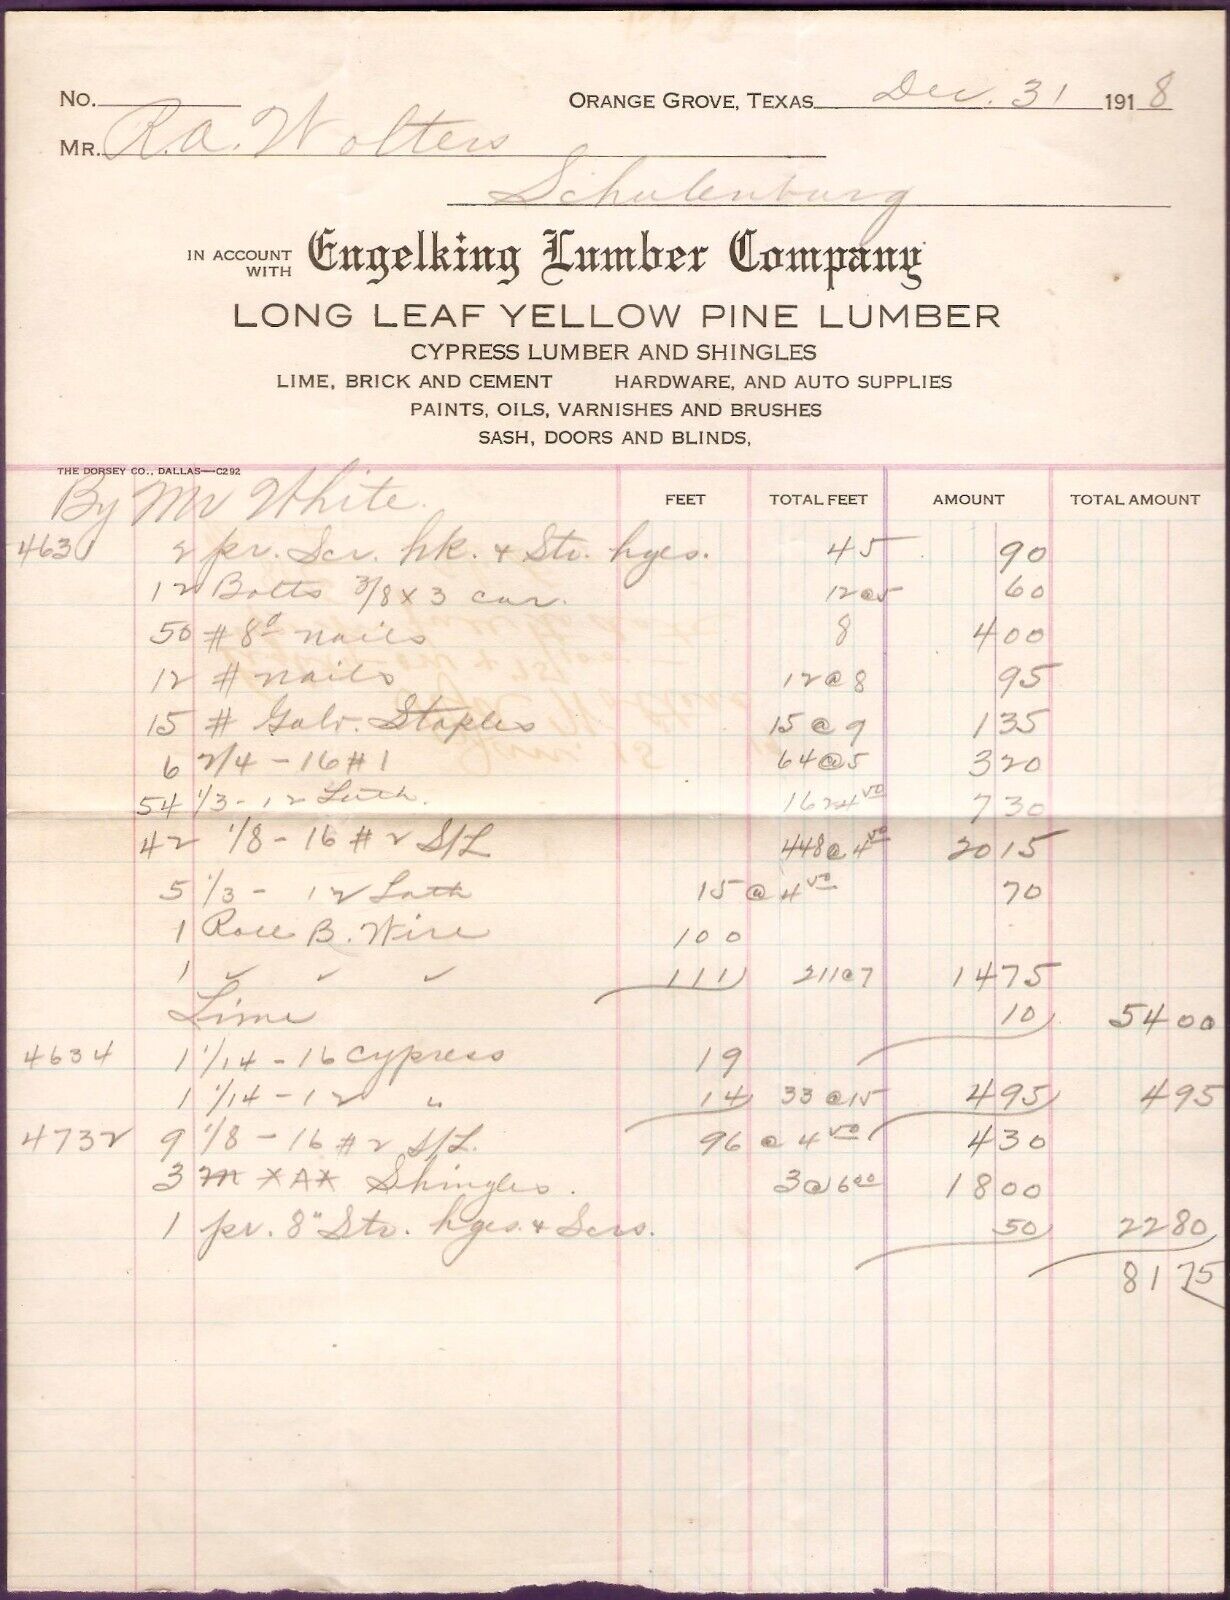 Orange Grove Texas 1918 Engelking Lumber Company Bill of Sale & Payment Note